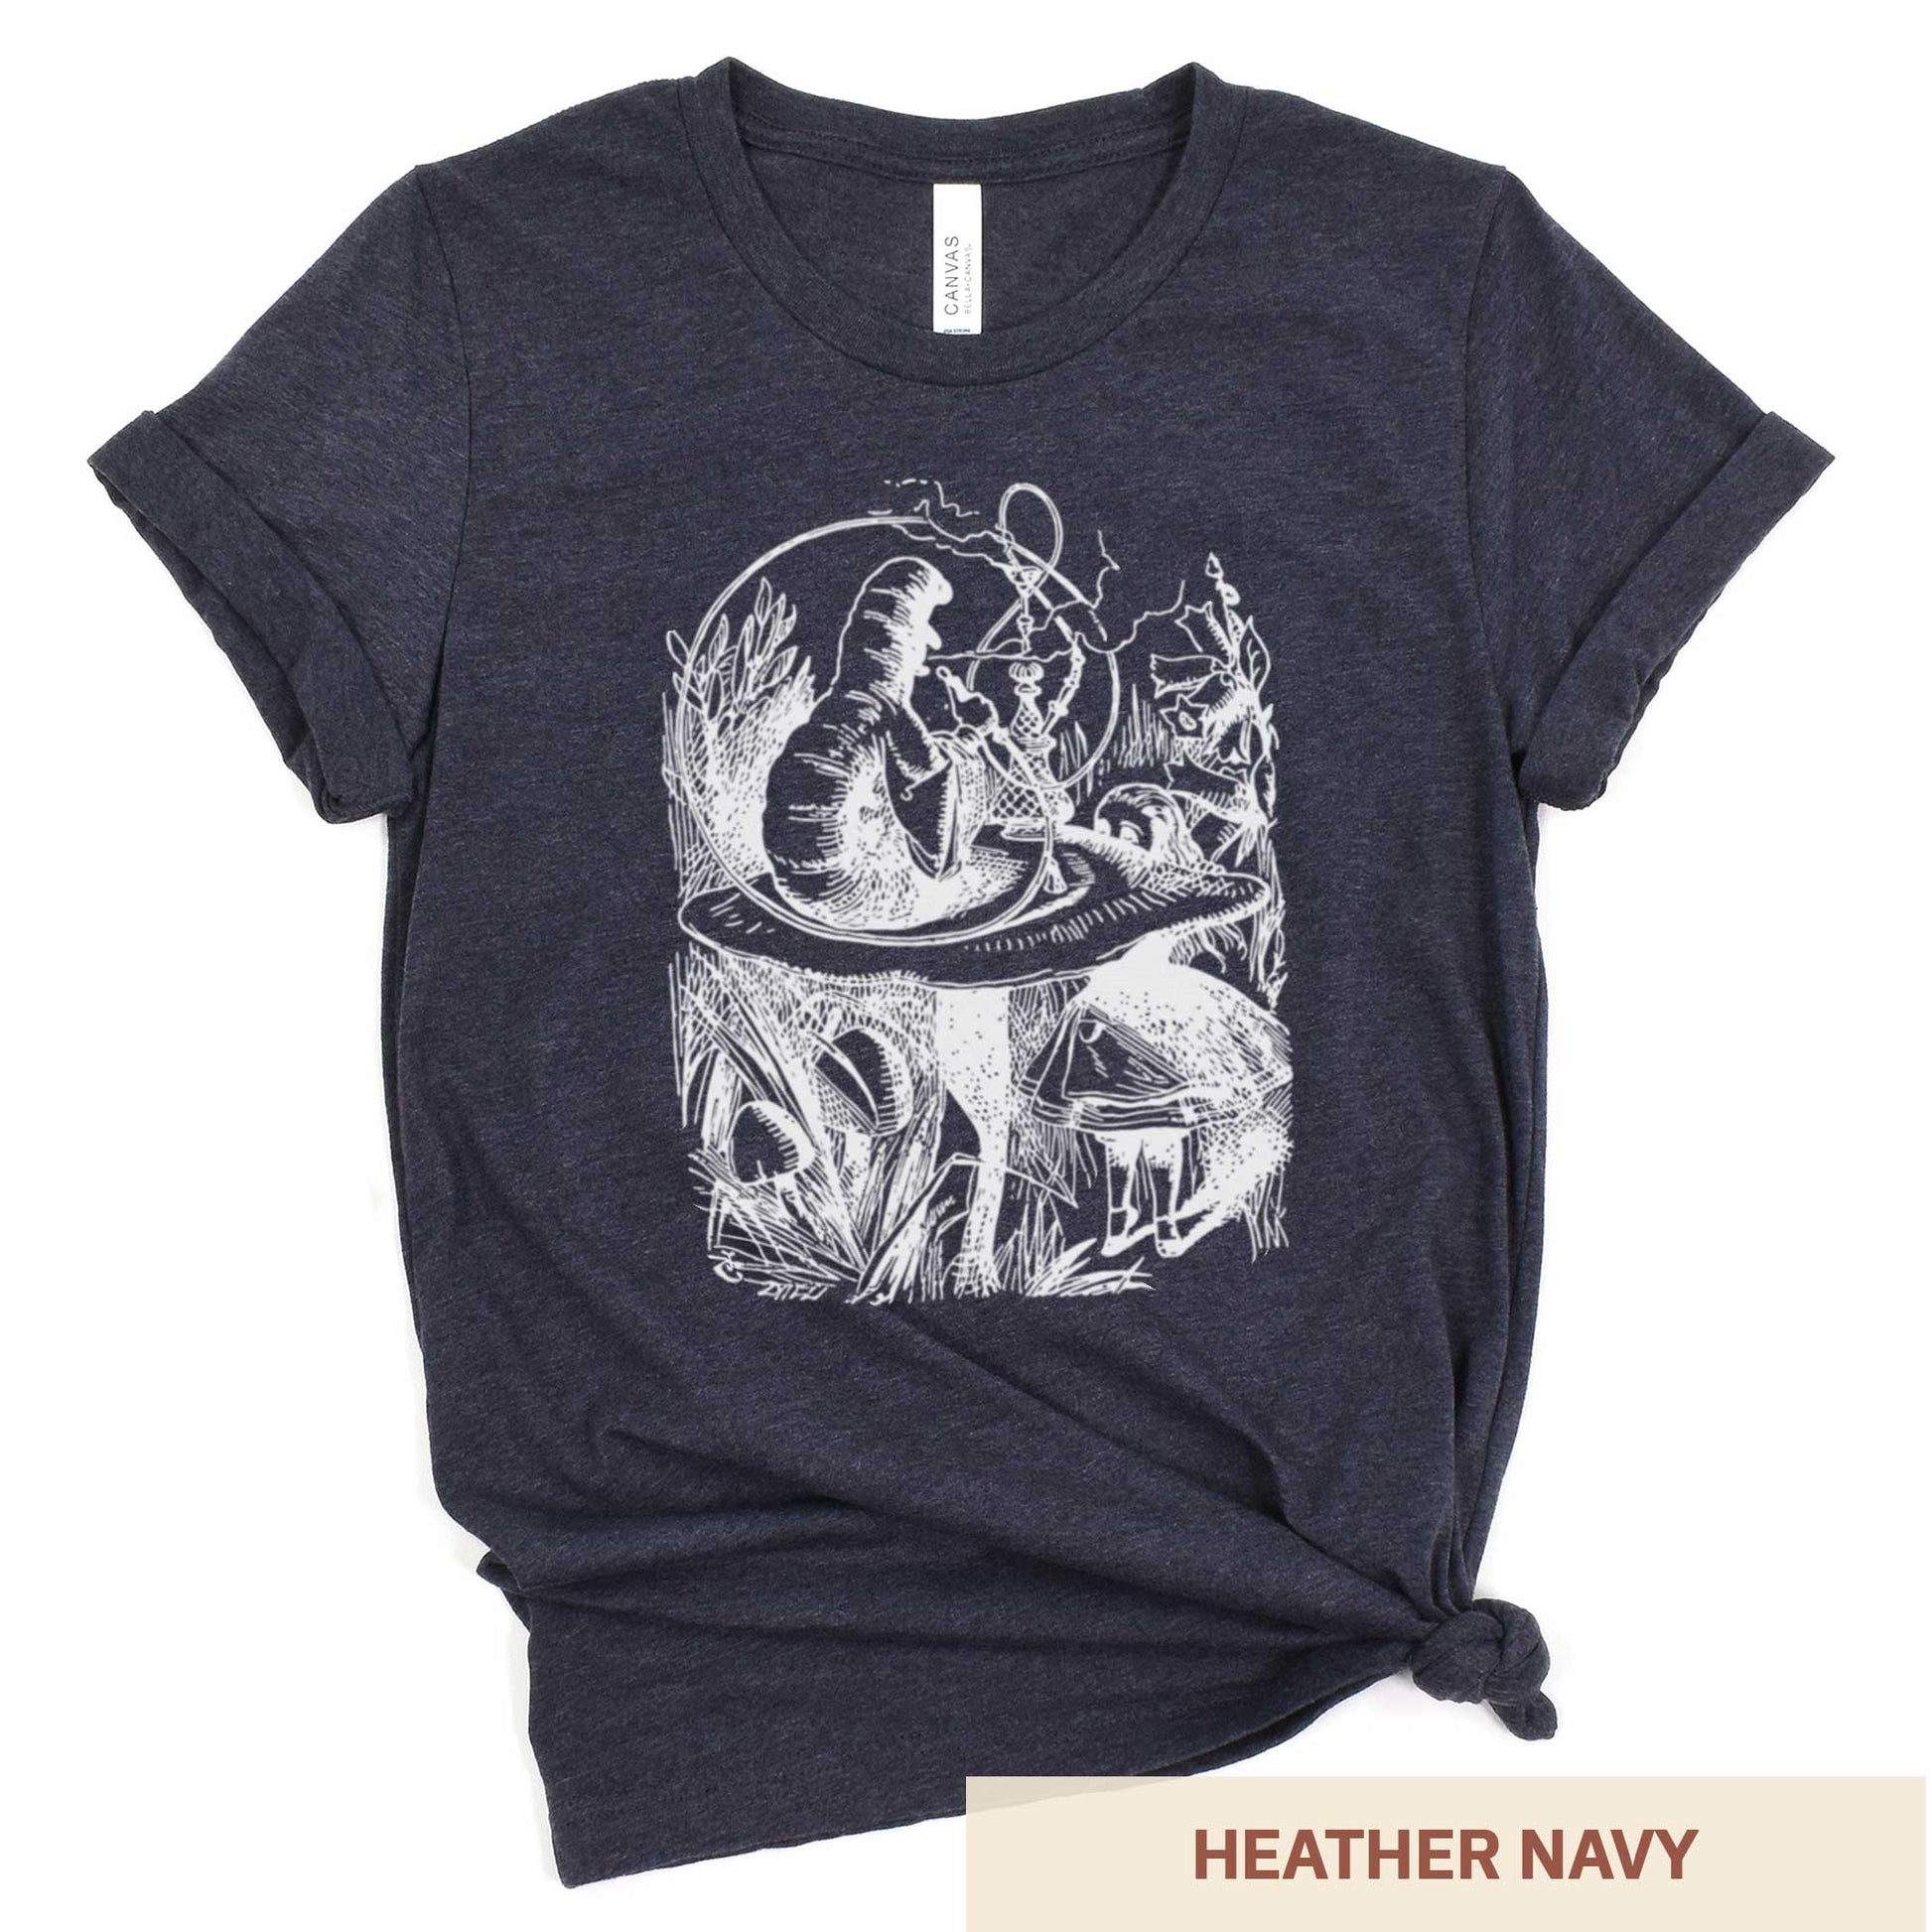 A heather navy Bella Canvas t-shirt featuring the John Tenniel illustration of Alice in Wonderland meeting the caterpillar who is sitting on a mushroom.